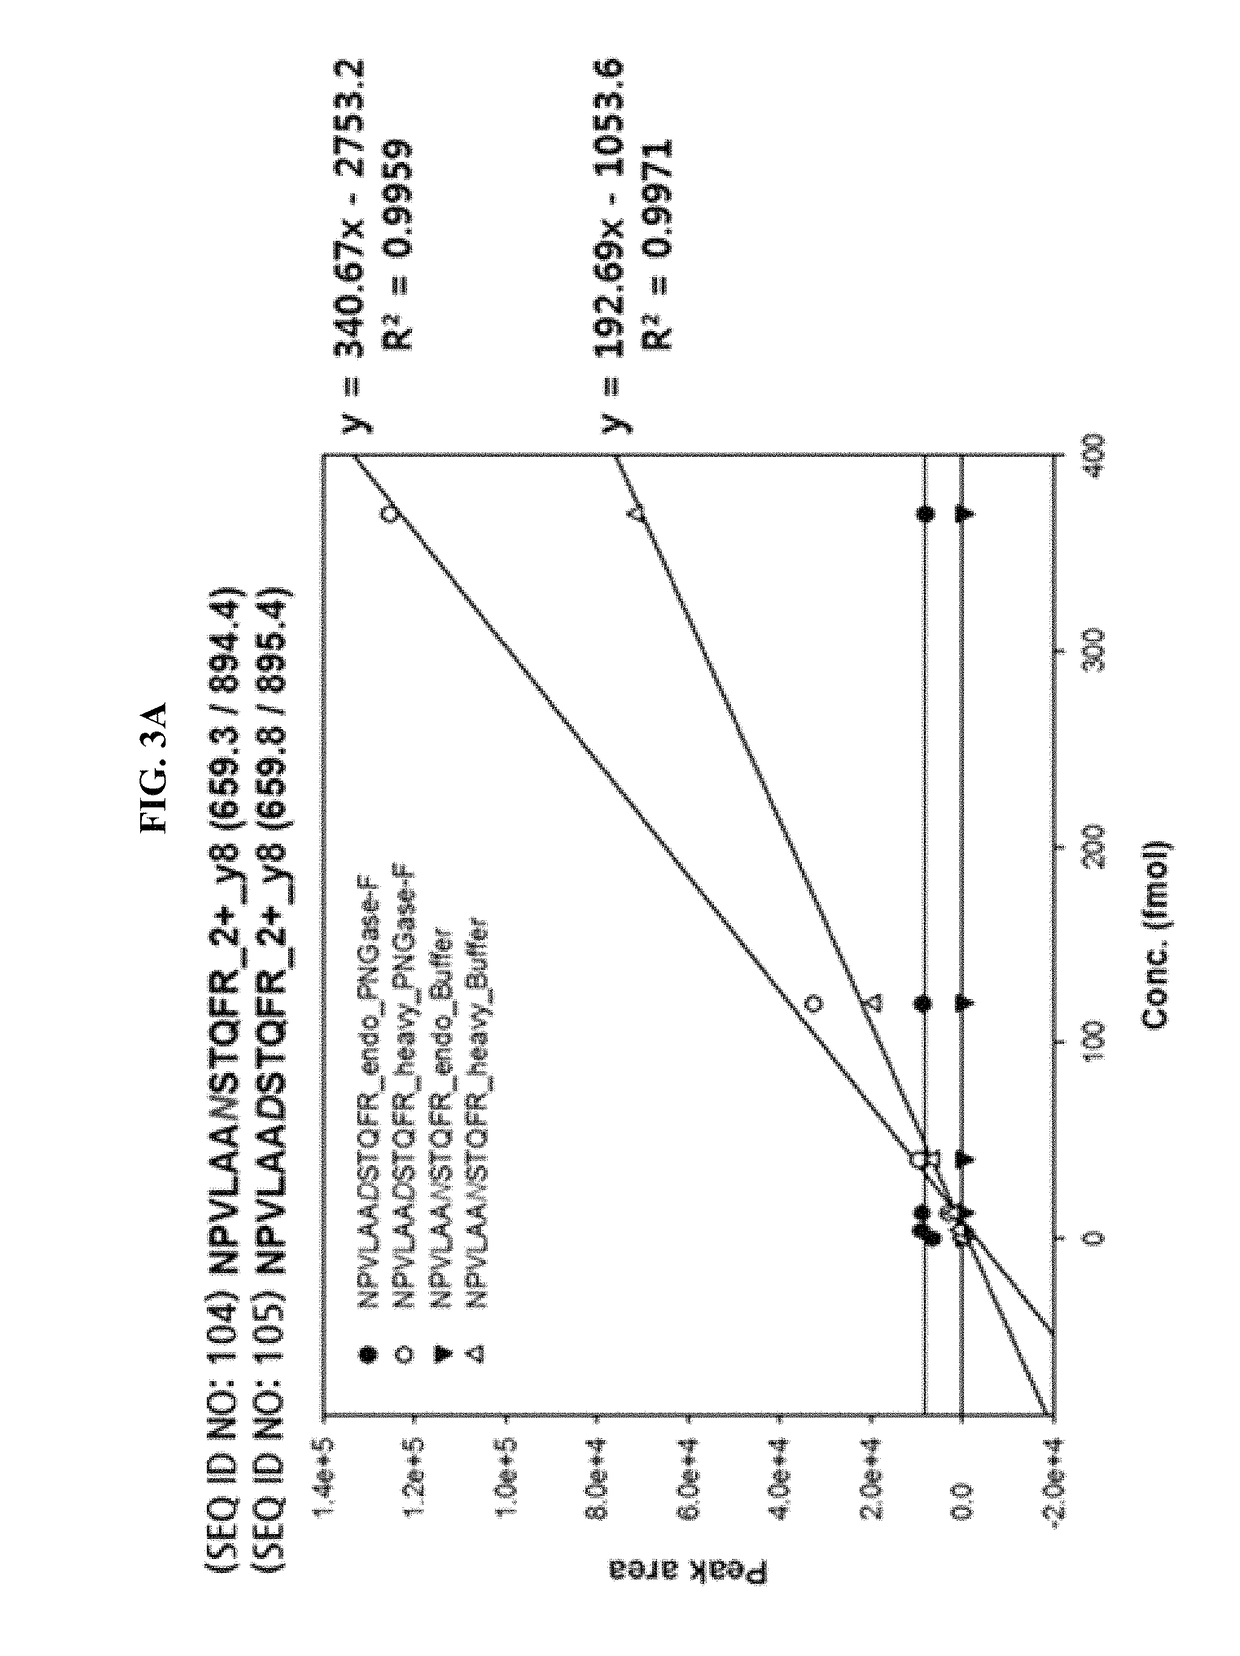 Method for diagnosing cancer through detection of deglycosylation of glycoprotein